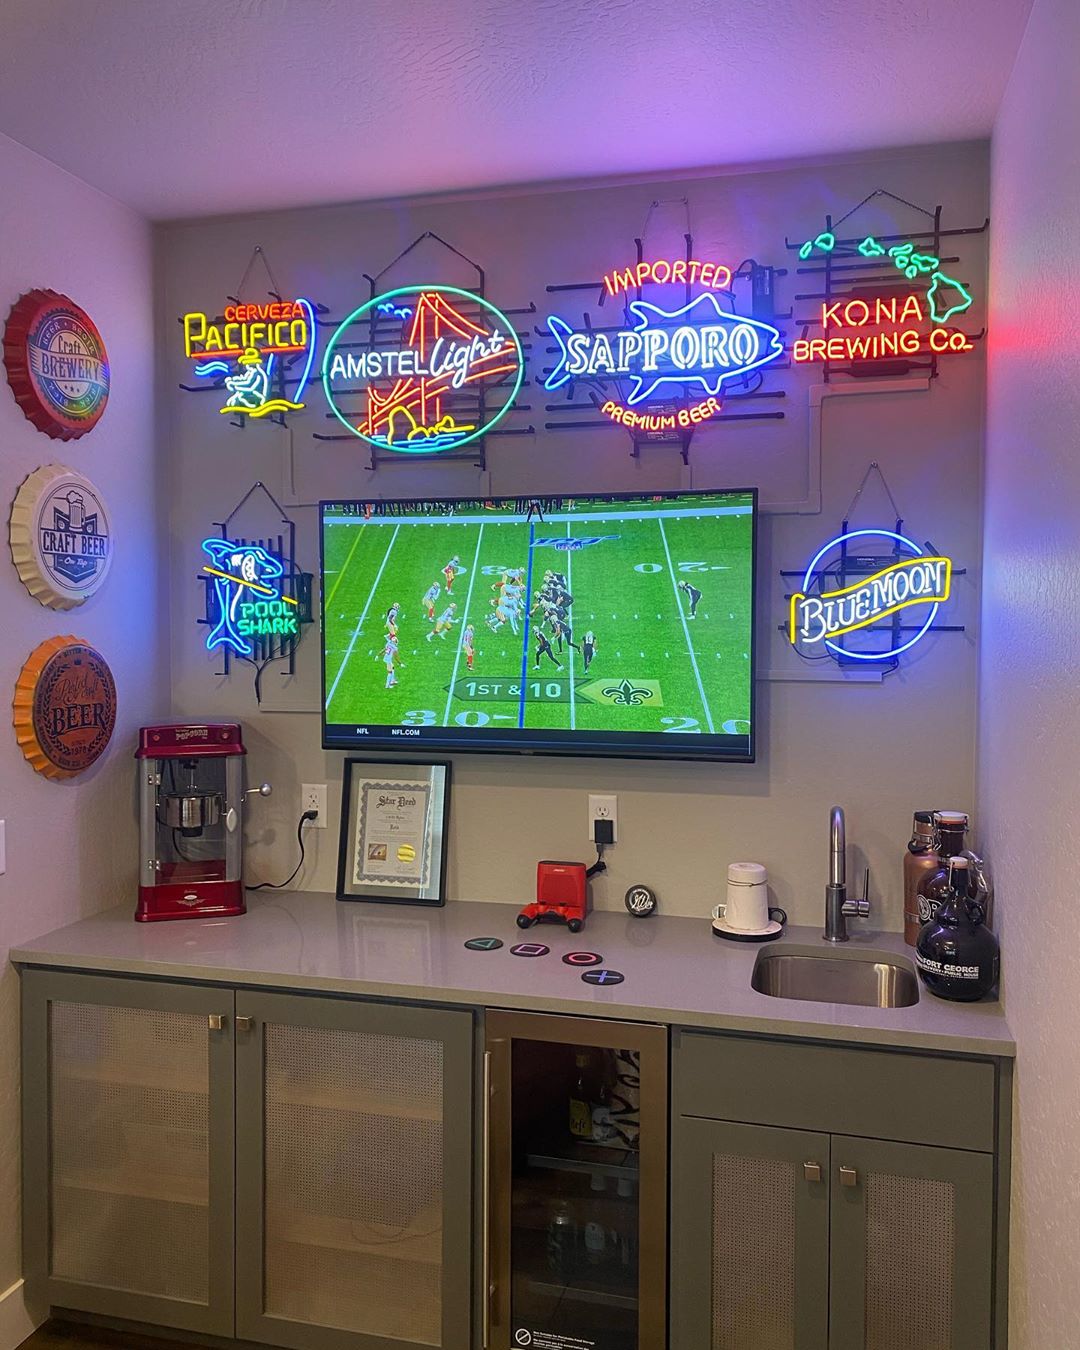 Basement Bar Area with TV and Neon Signs on the Wall. Photo by Instagram user @the.carto.grapher